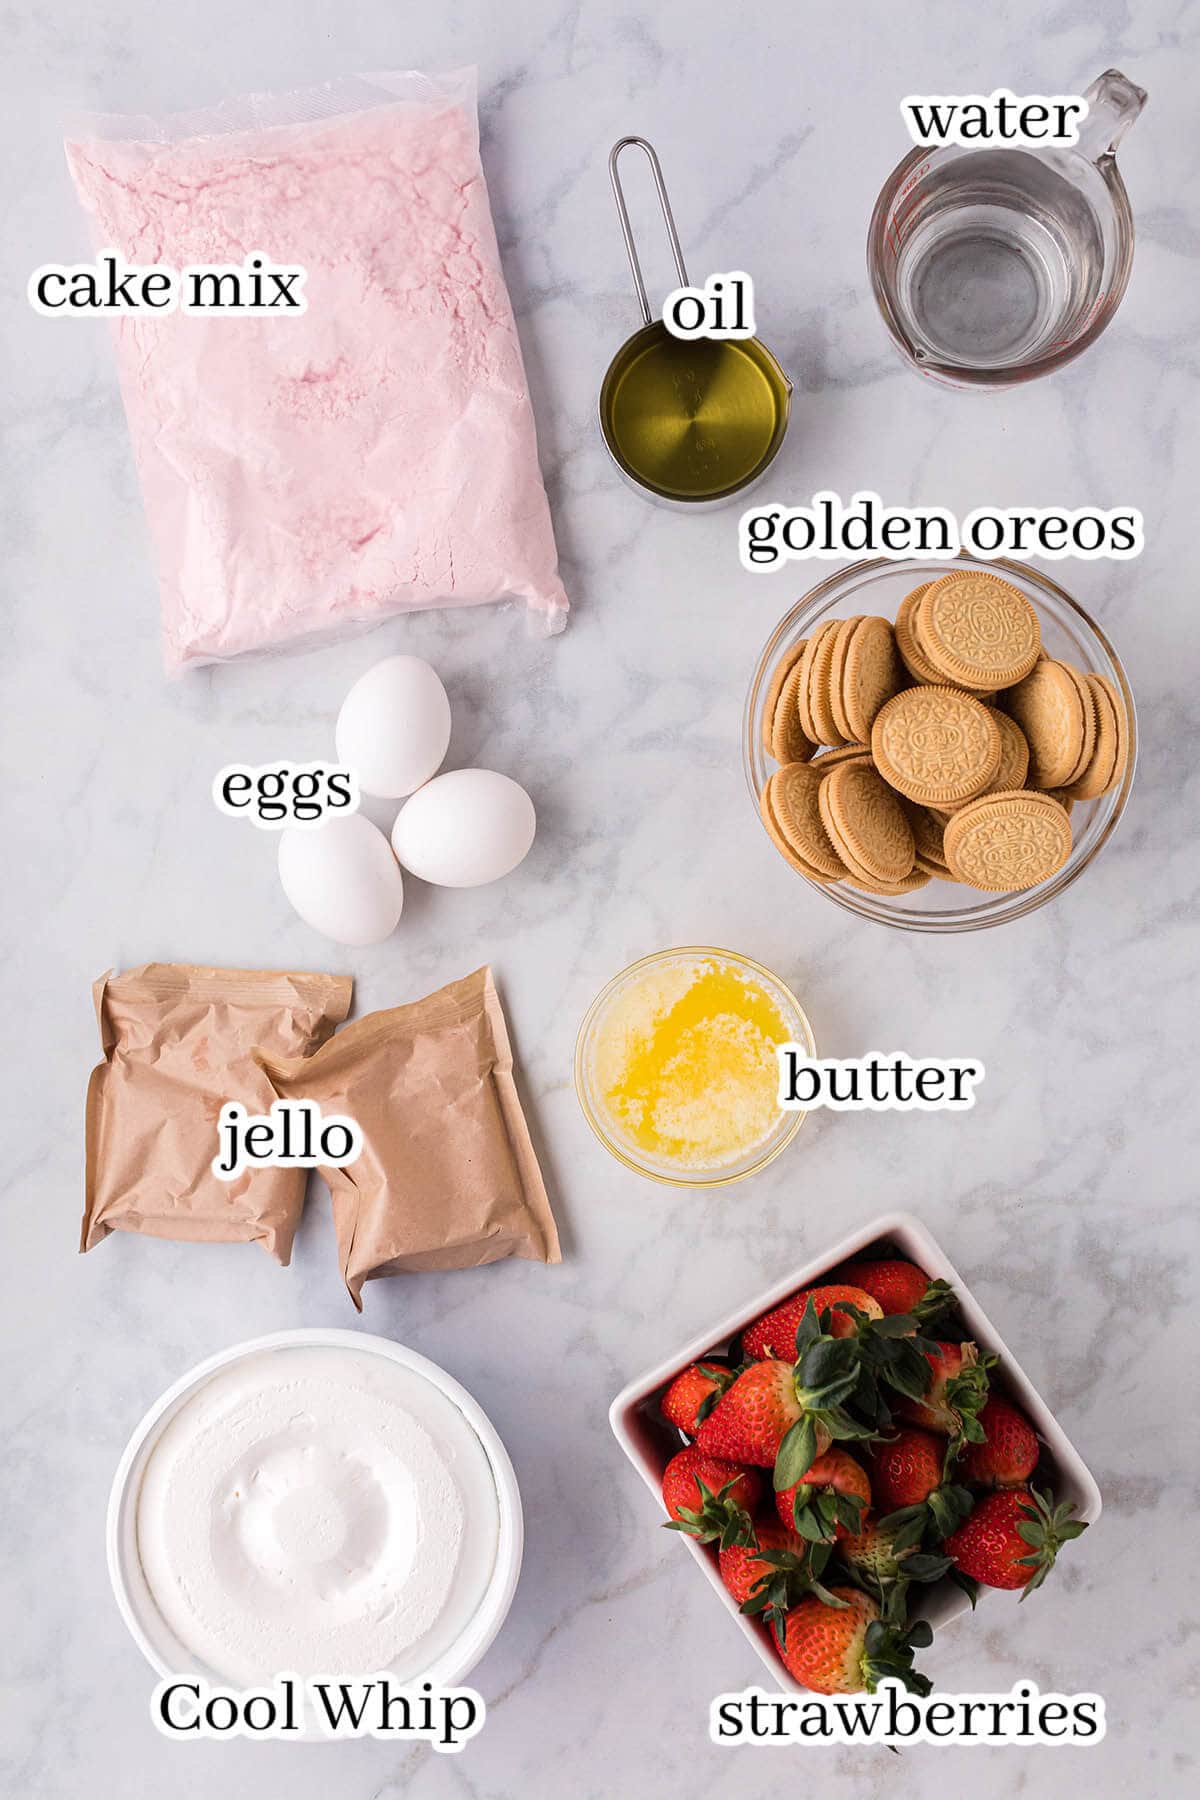 Ingredients to make cake recipe, with print overlay.